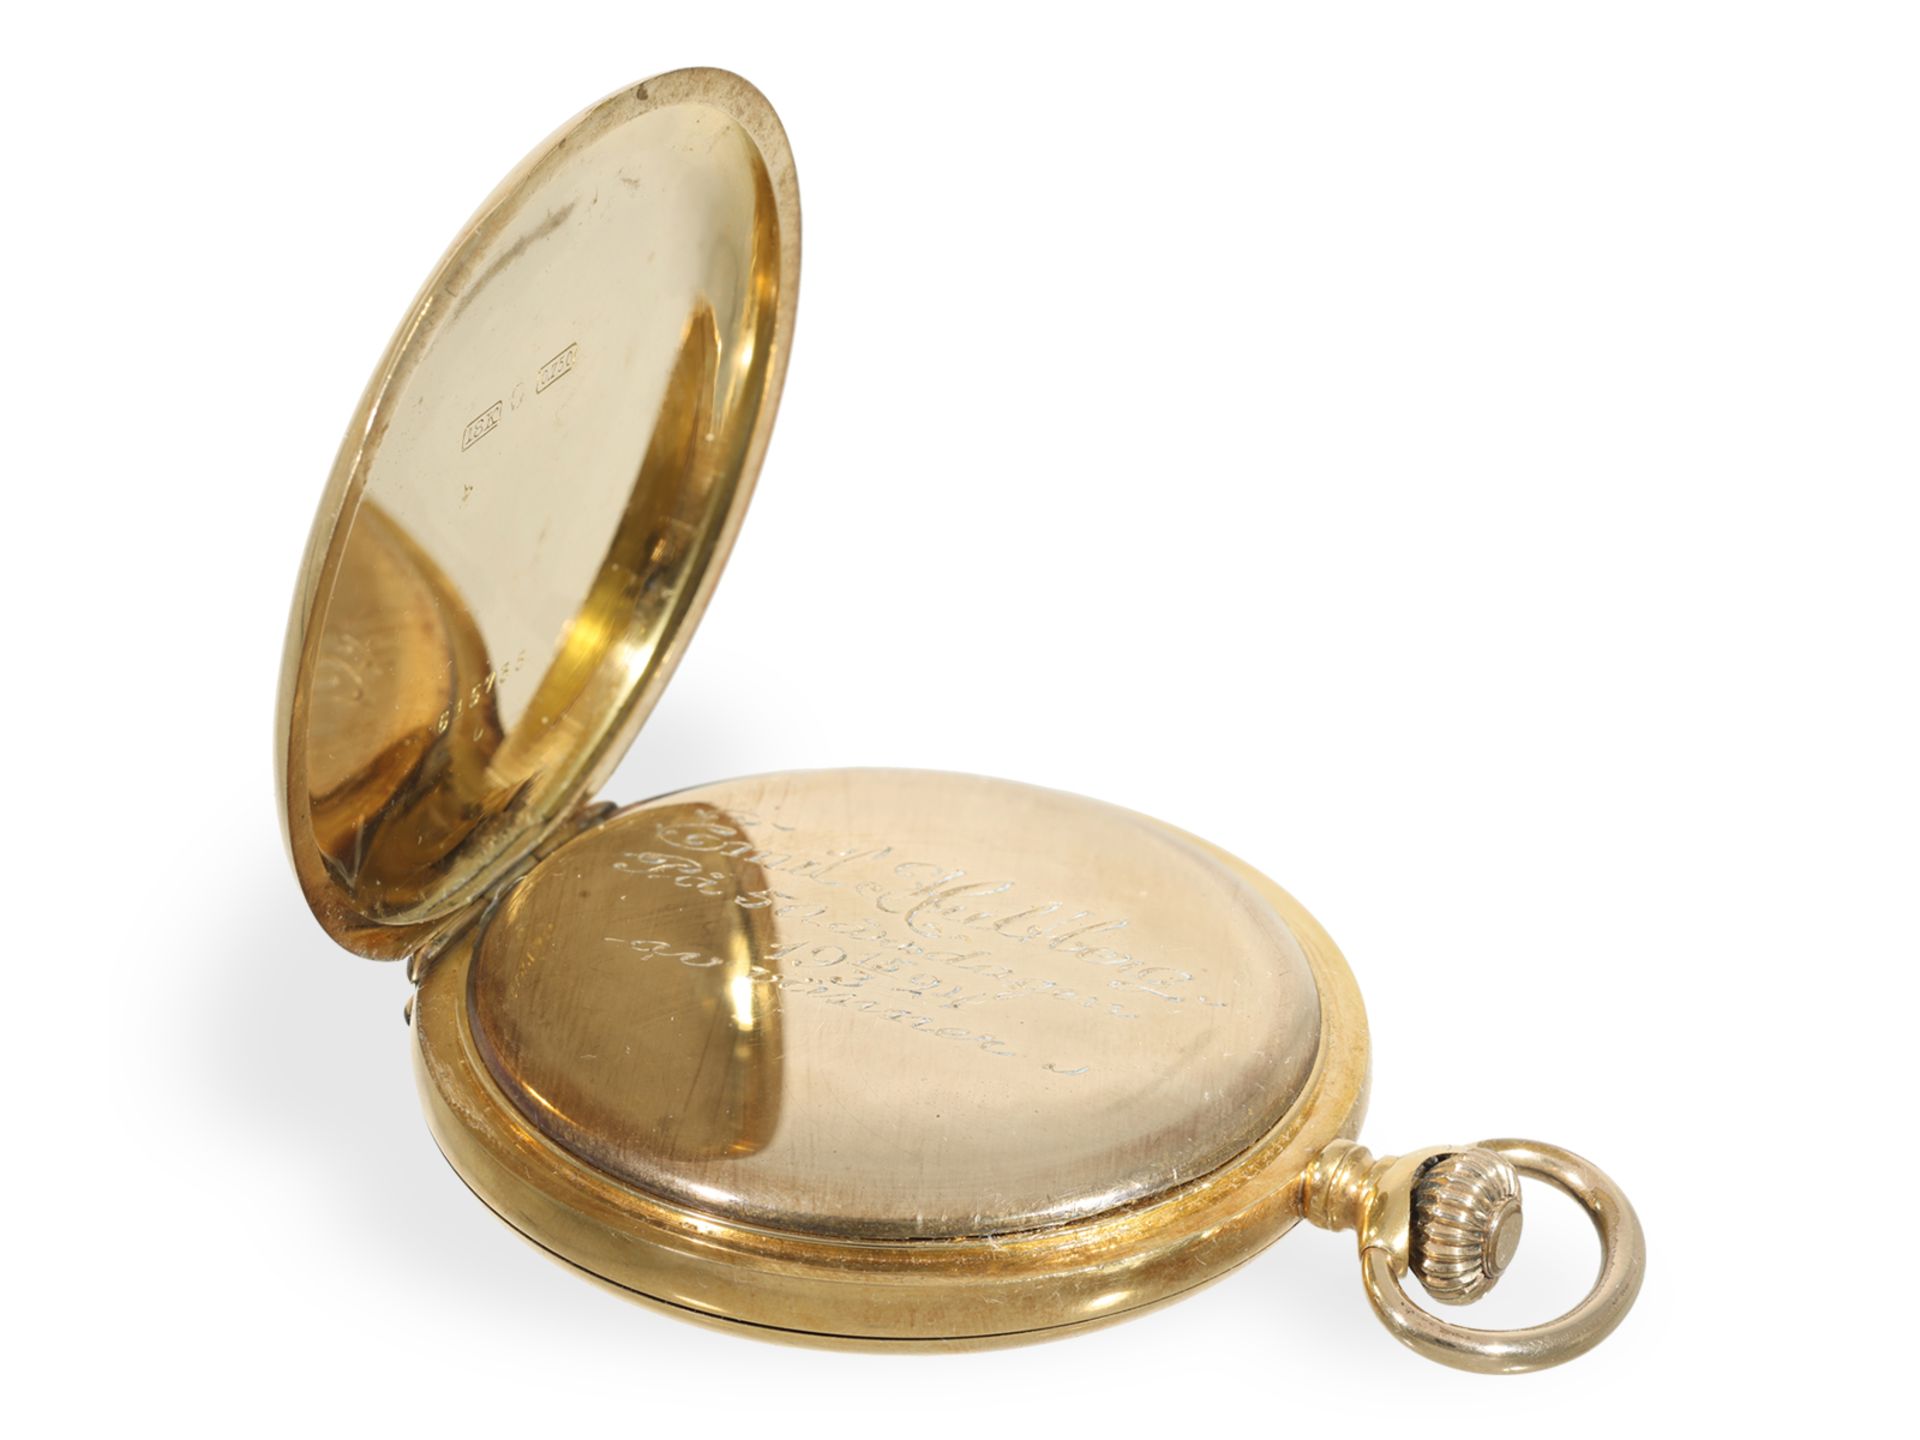 Pocket watch: fine gold hunting case watch with precision movement and gold watch chain, Record Watc - Image 5 of 8